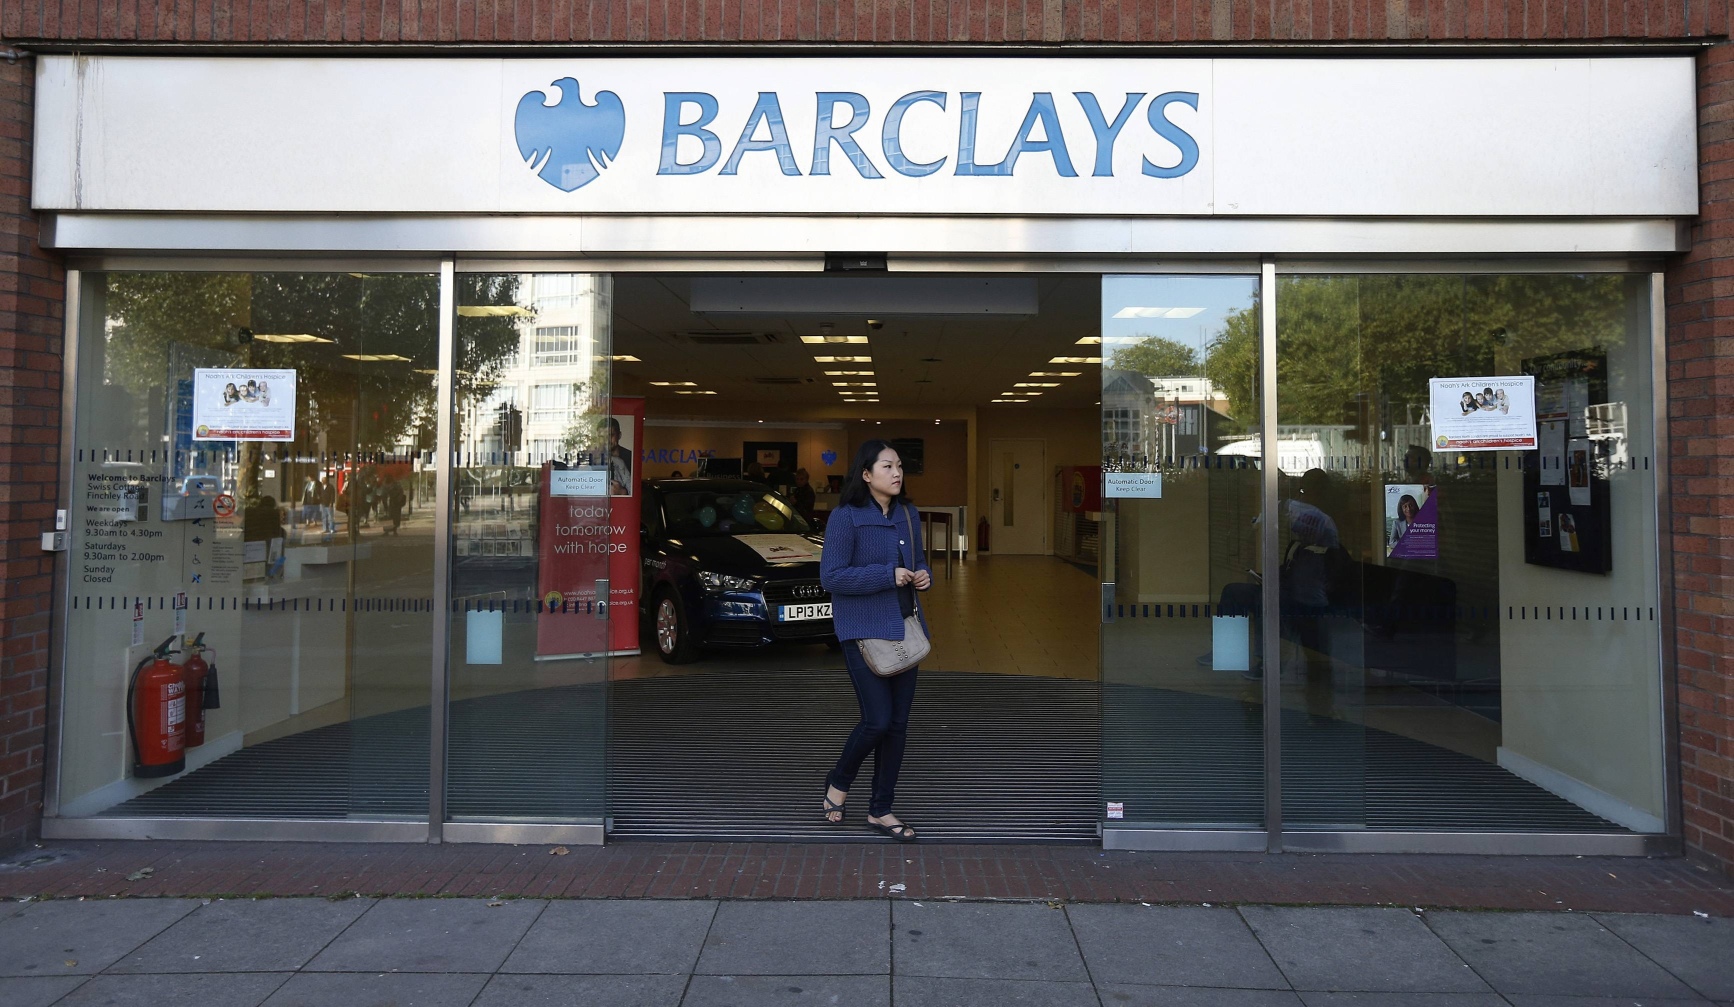 A woman leaves the Swiss Cottage branch of Barclays in London. Eight men have been arrested over the alleged theft of US$2.1 million by taking control of a Barclays branch computer system. Photo: Reuters